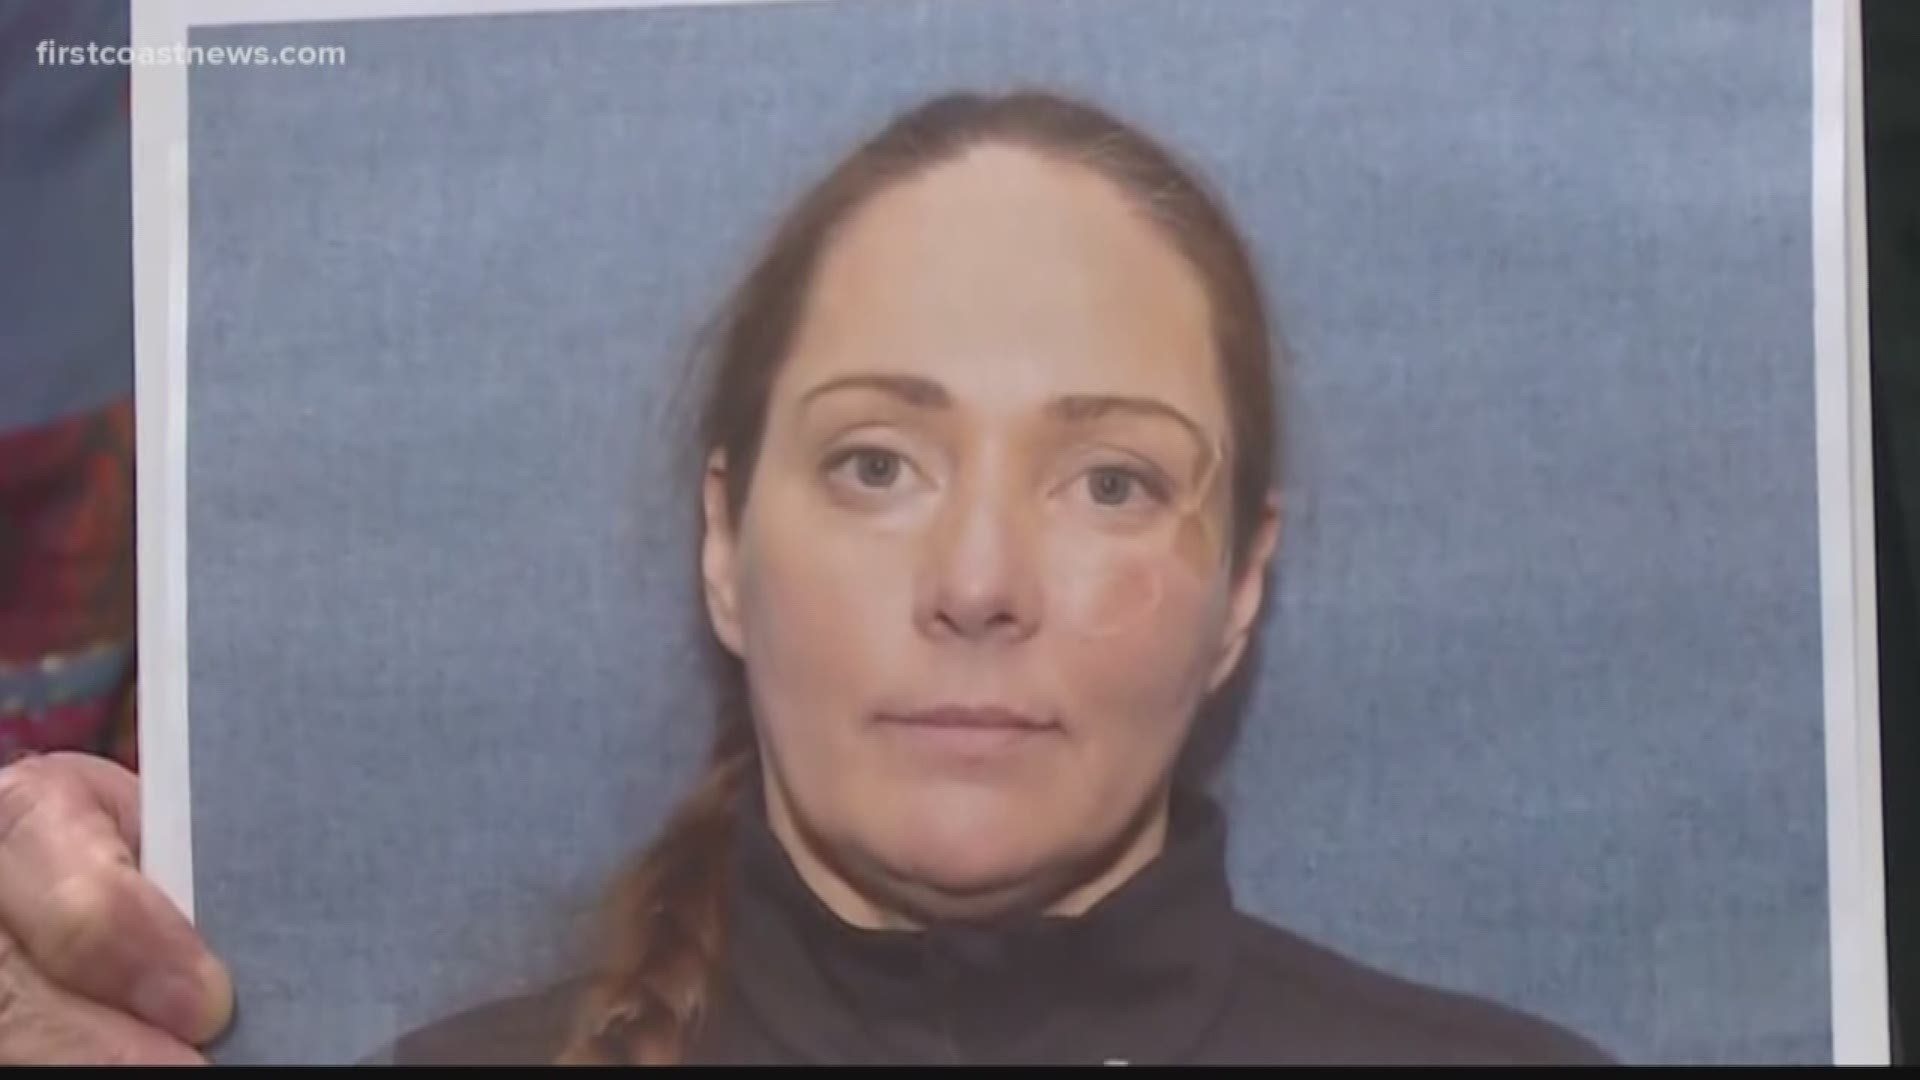 Kessler, also known as Jennifer Sybert, is facing a first-degree murder charge in the disappearance of Joleen Cummings.